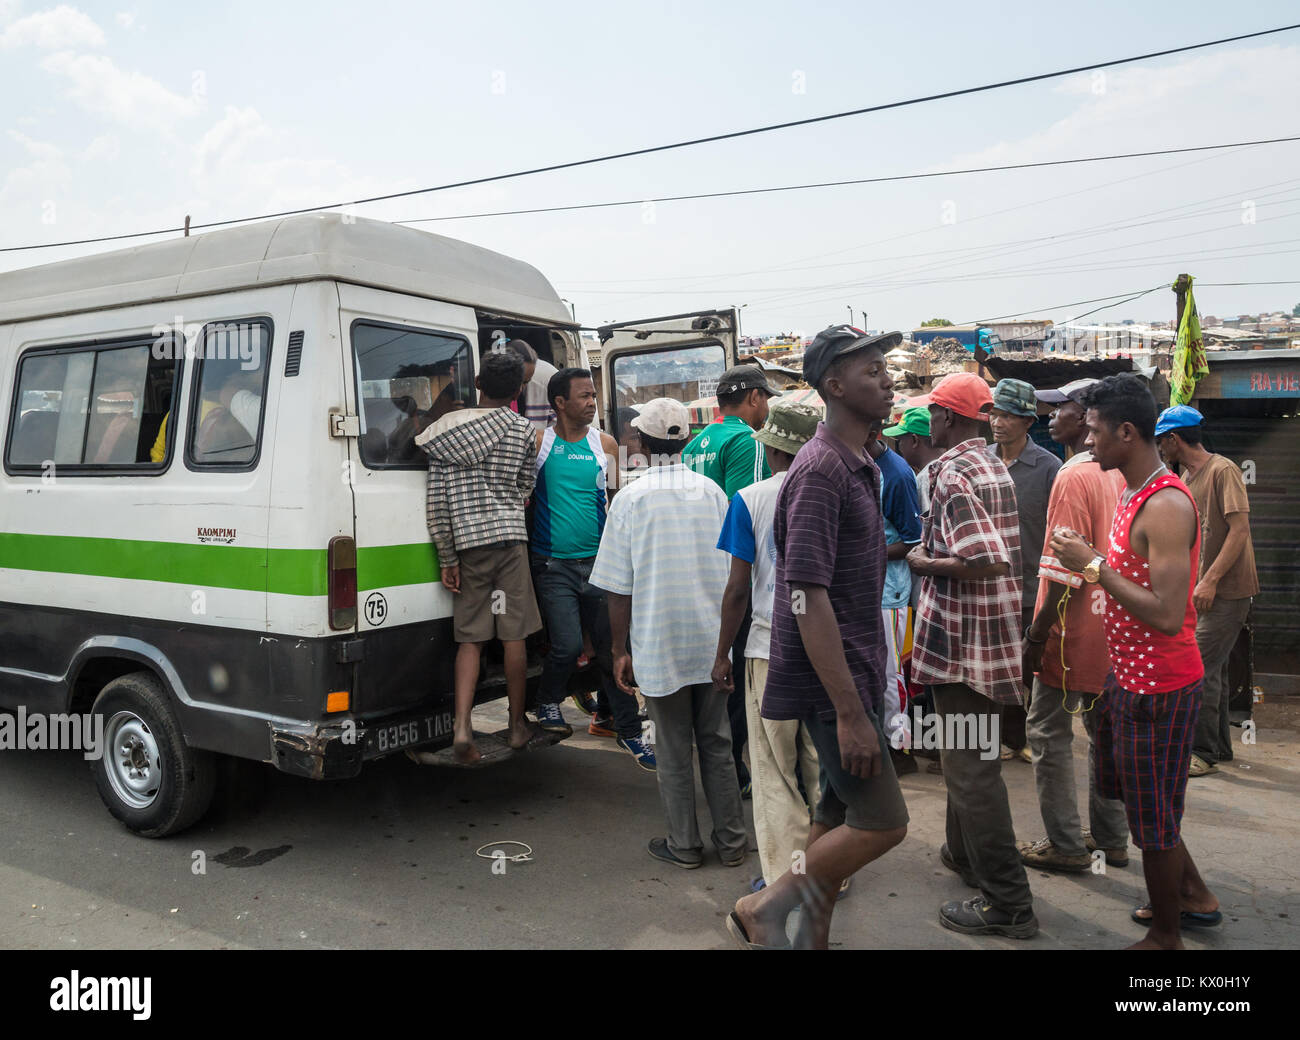 Minibus is a popular transportation for locals. Madagascar, Africa. Stock Photo